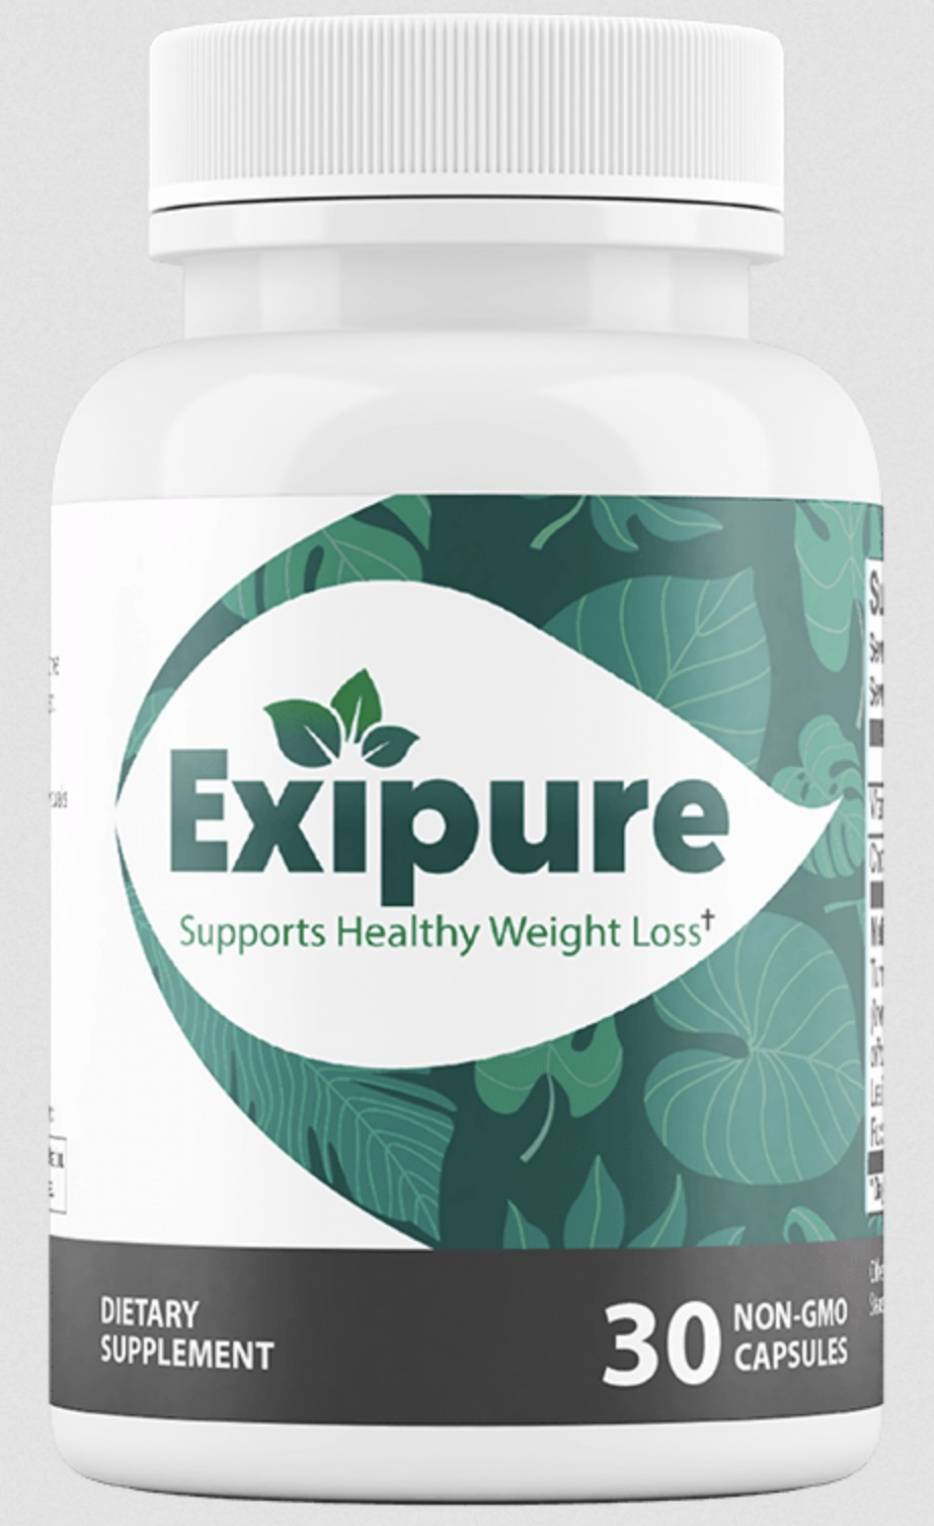 What Is Exipure Used For